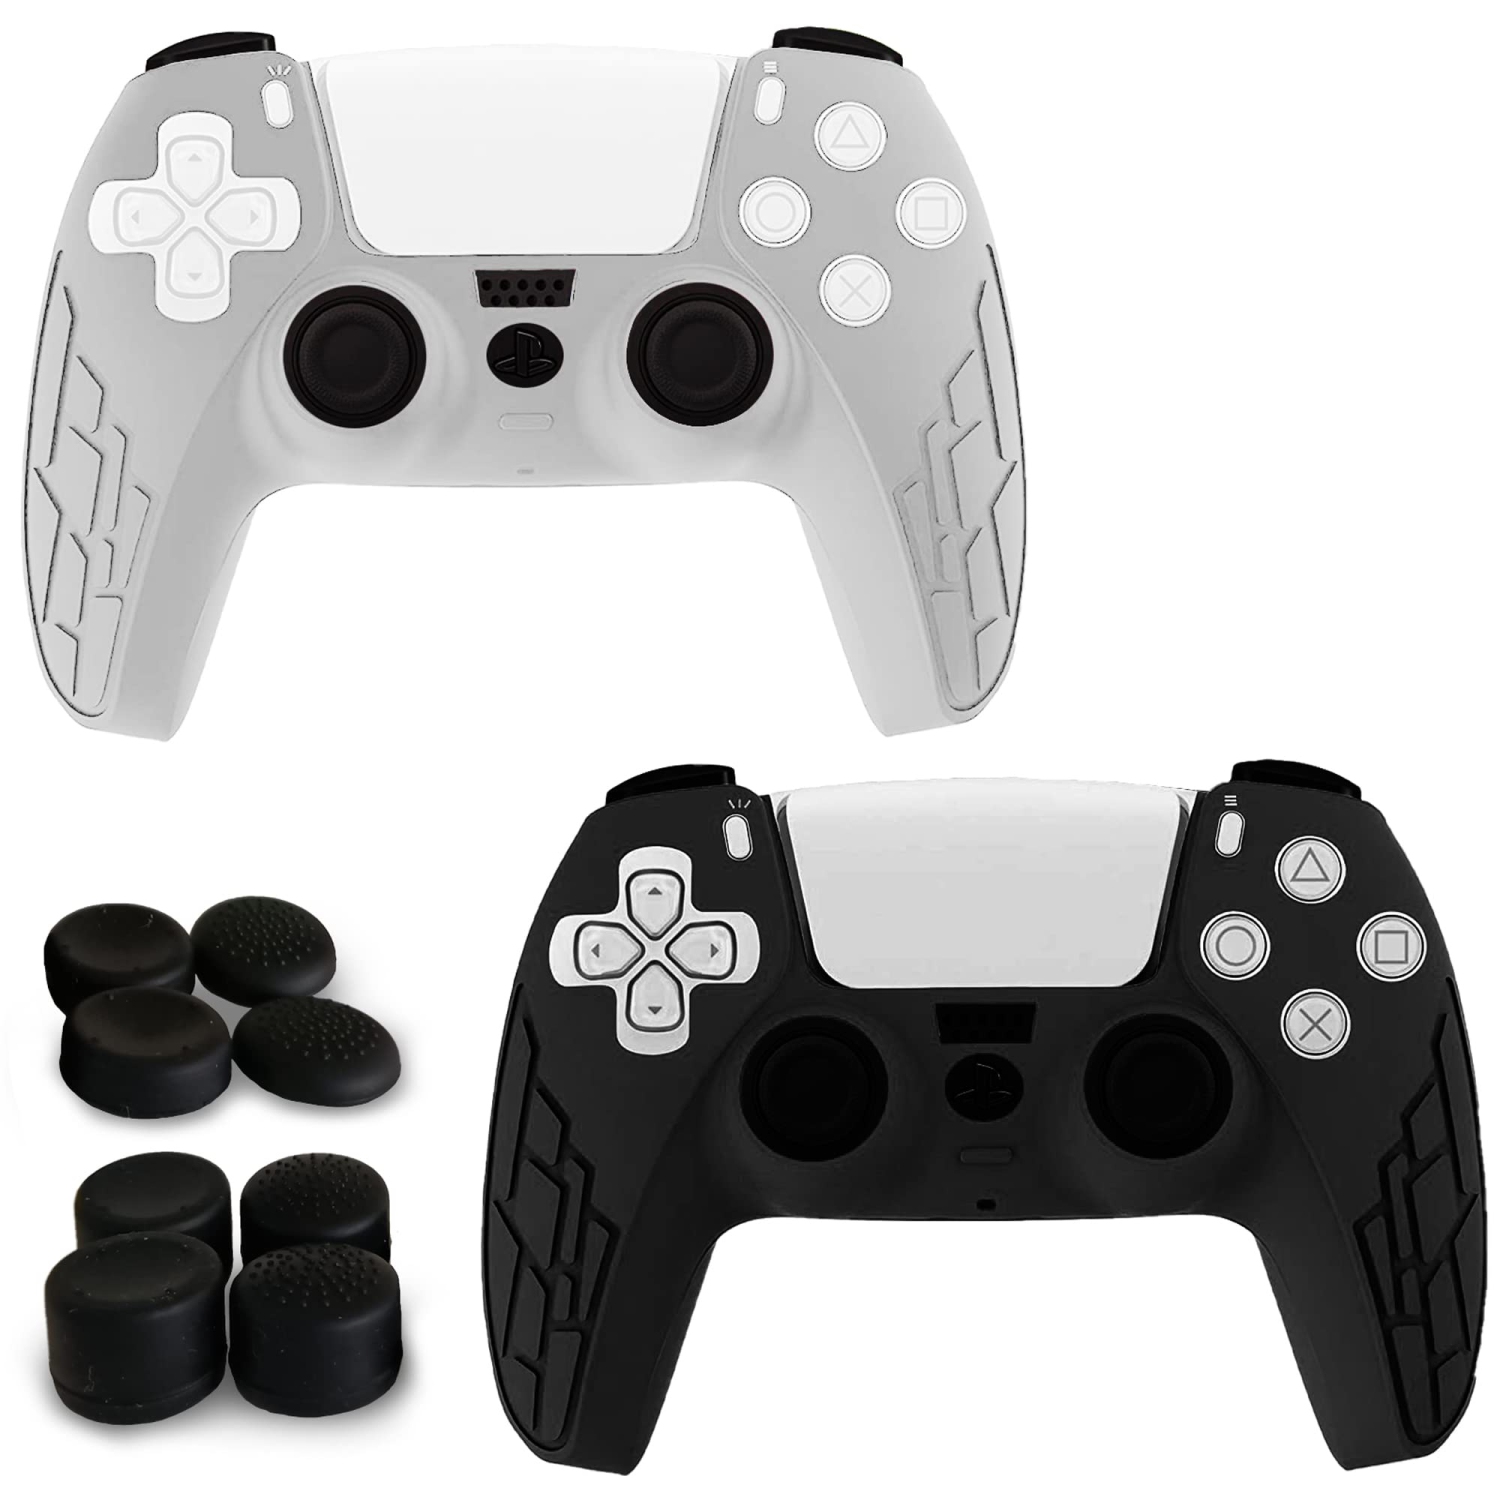 Youdepot 2 Pack PS5 Controller Skins | Sony Playstation 5 Accessories - Silicone Protector Cover Skin for Dualshock with 8 x